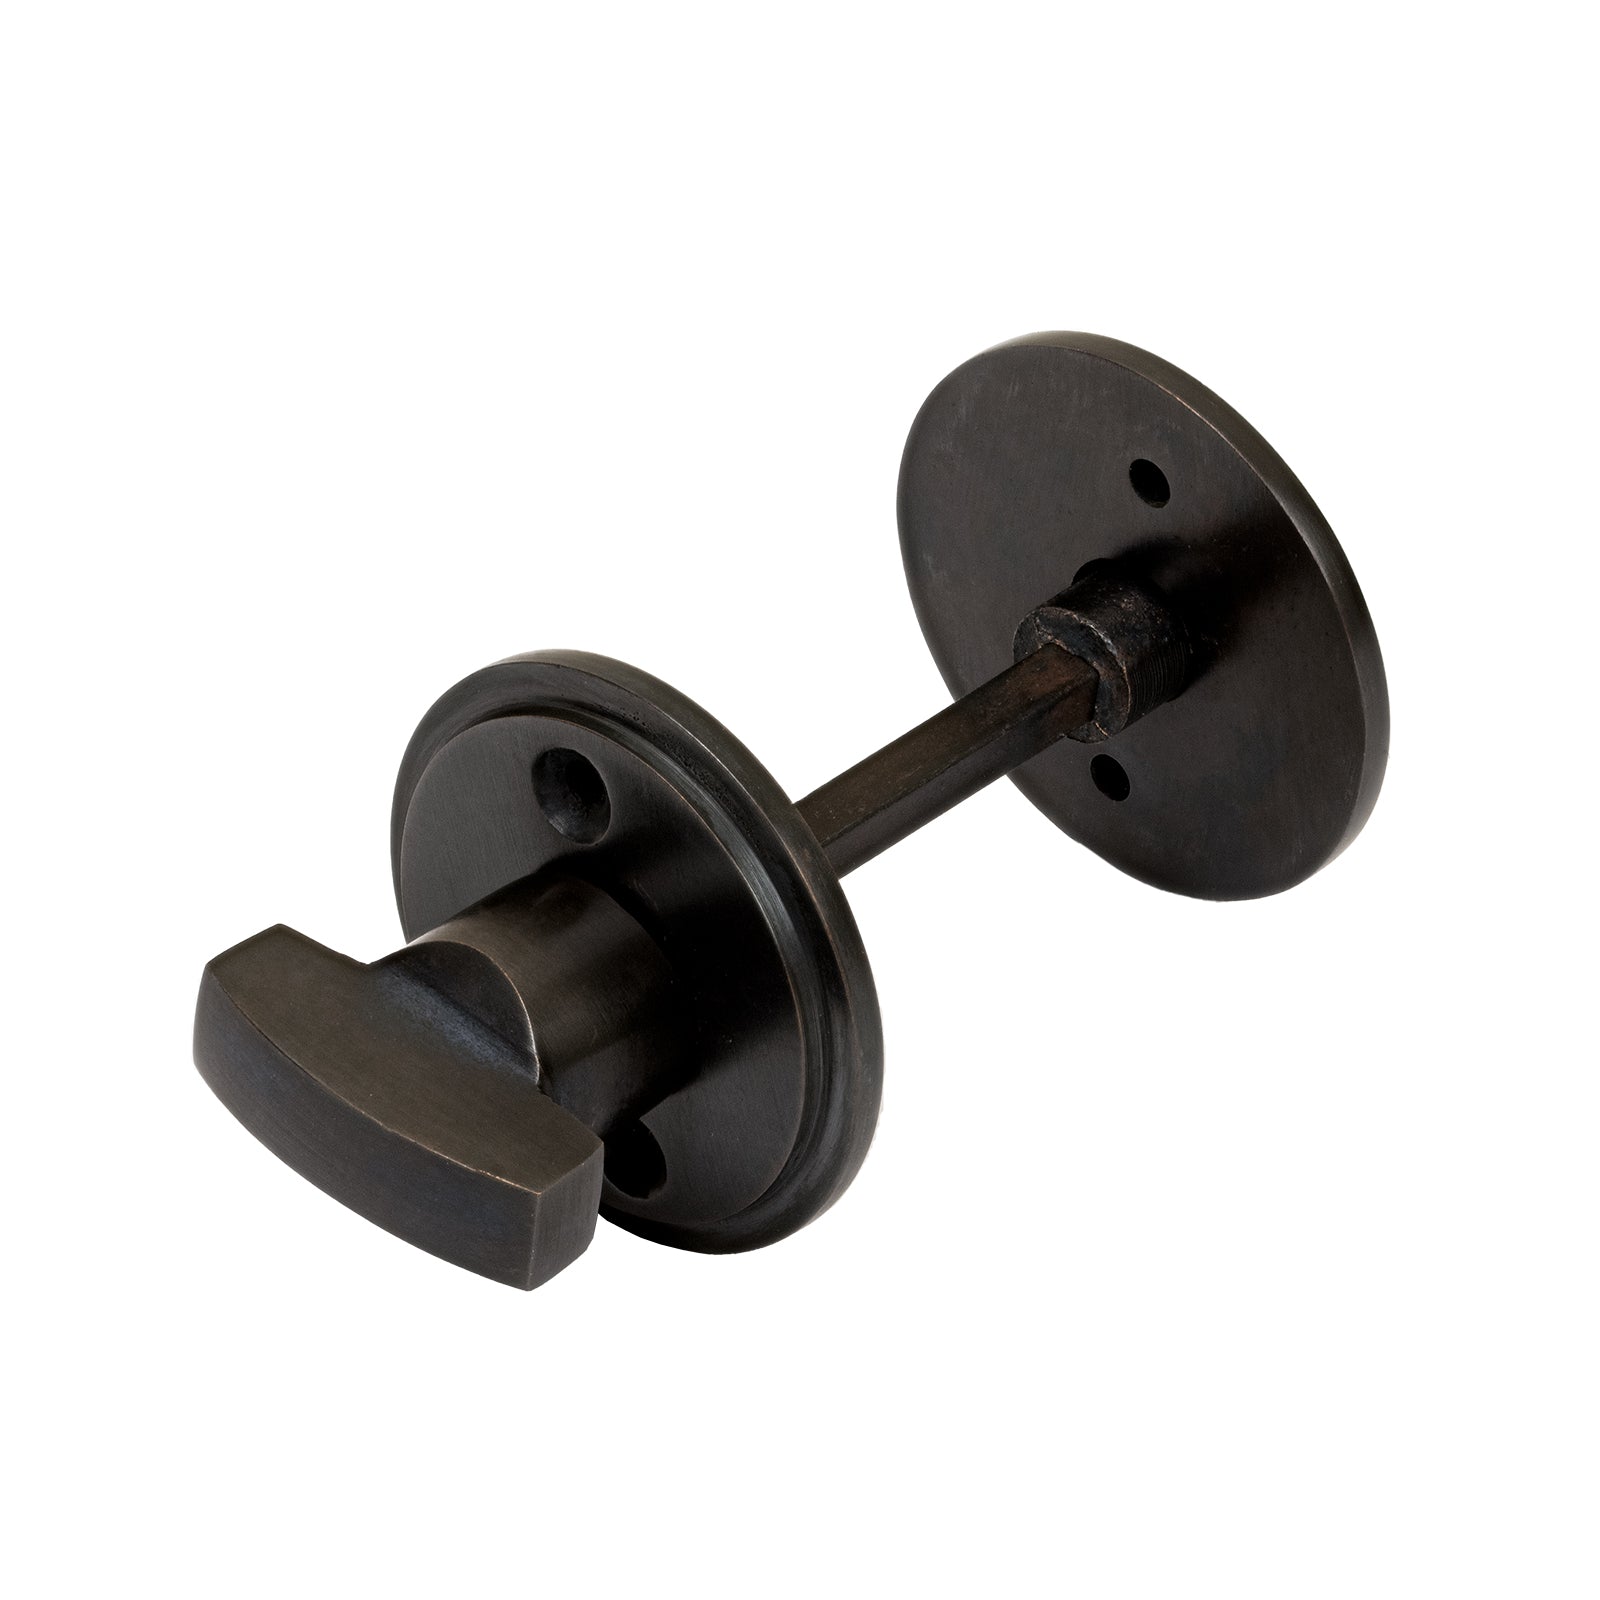 Round turn & release oil rubbed bronze